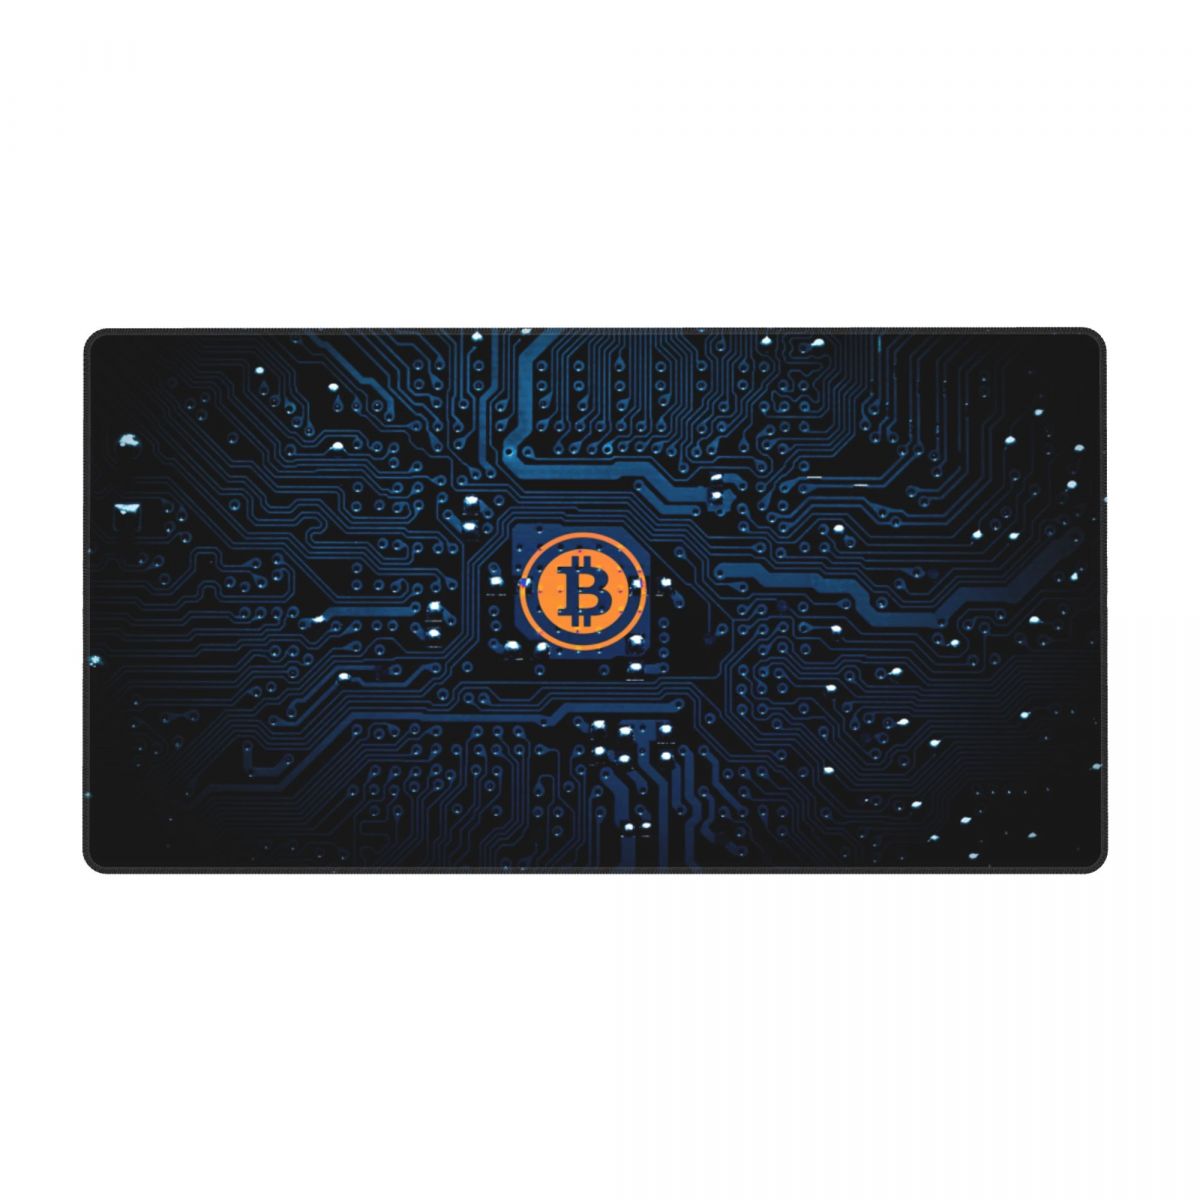 Bitcoin BTC Cryptocurrency PC Mouse Mat Mousepad XL Game Anti-slip Natural Rubber